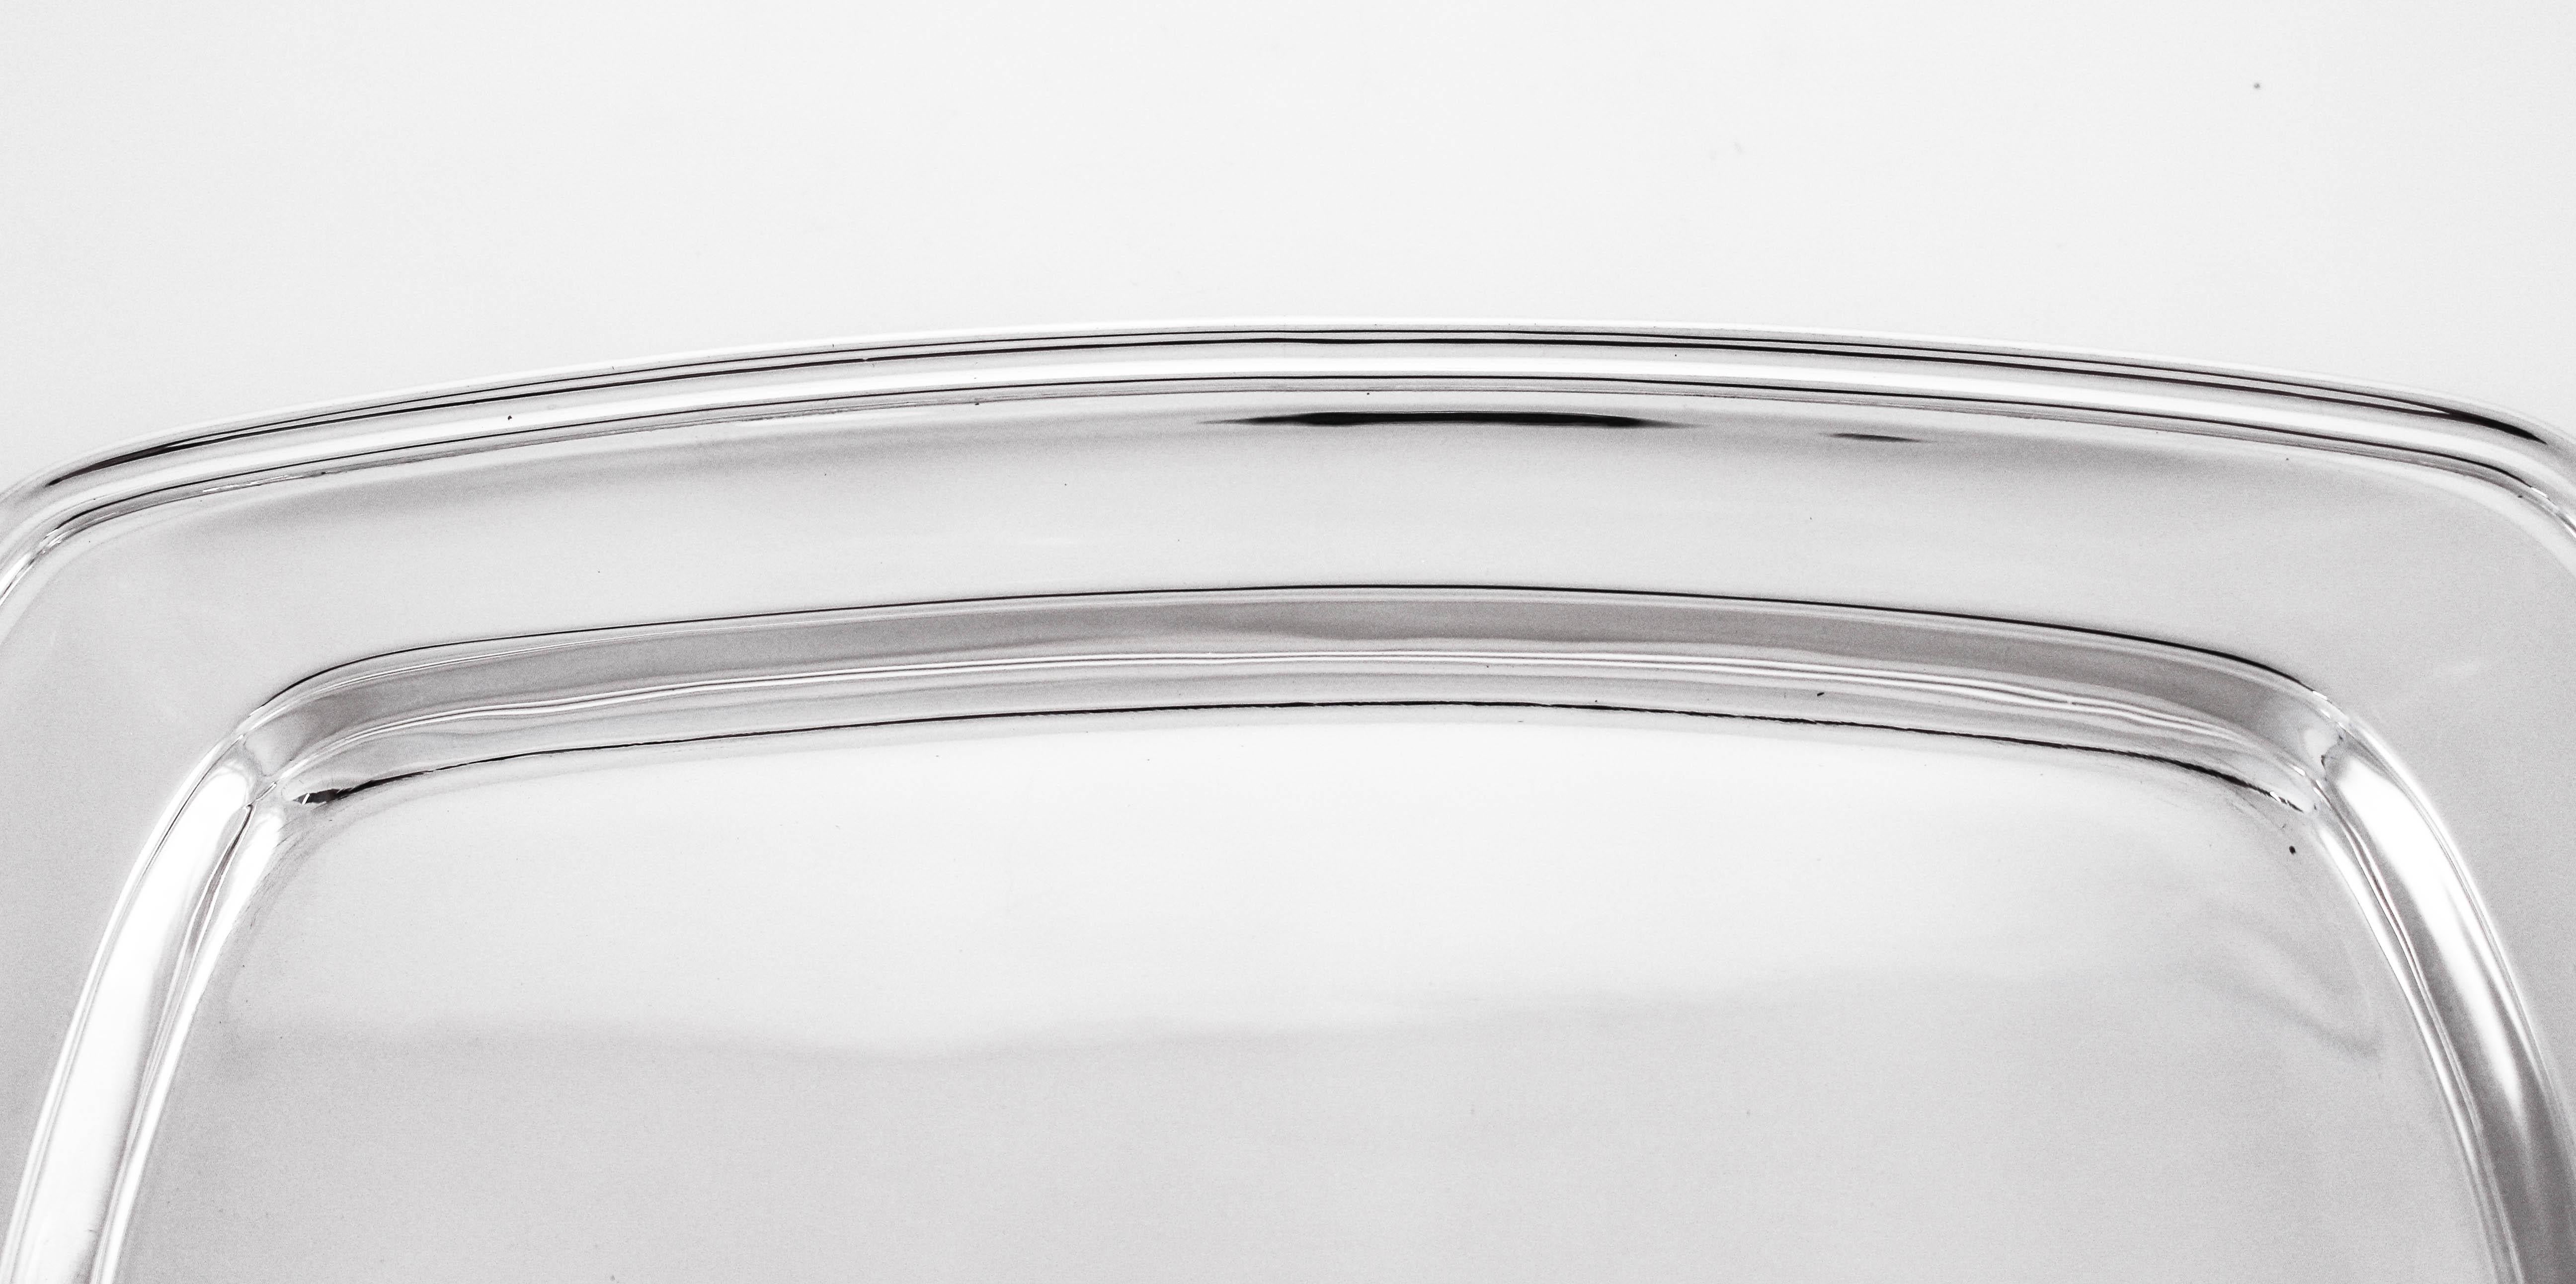 This oblong sterling silver tray by Towle Silversmiths is designed in the Mary Chilton pattern. It has a simple tailored look; no etching or decoration. A clean and modern feel. Perfect for mail, perfume bottles or even for desserts.